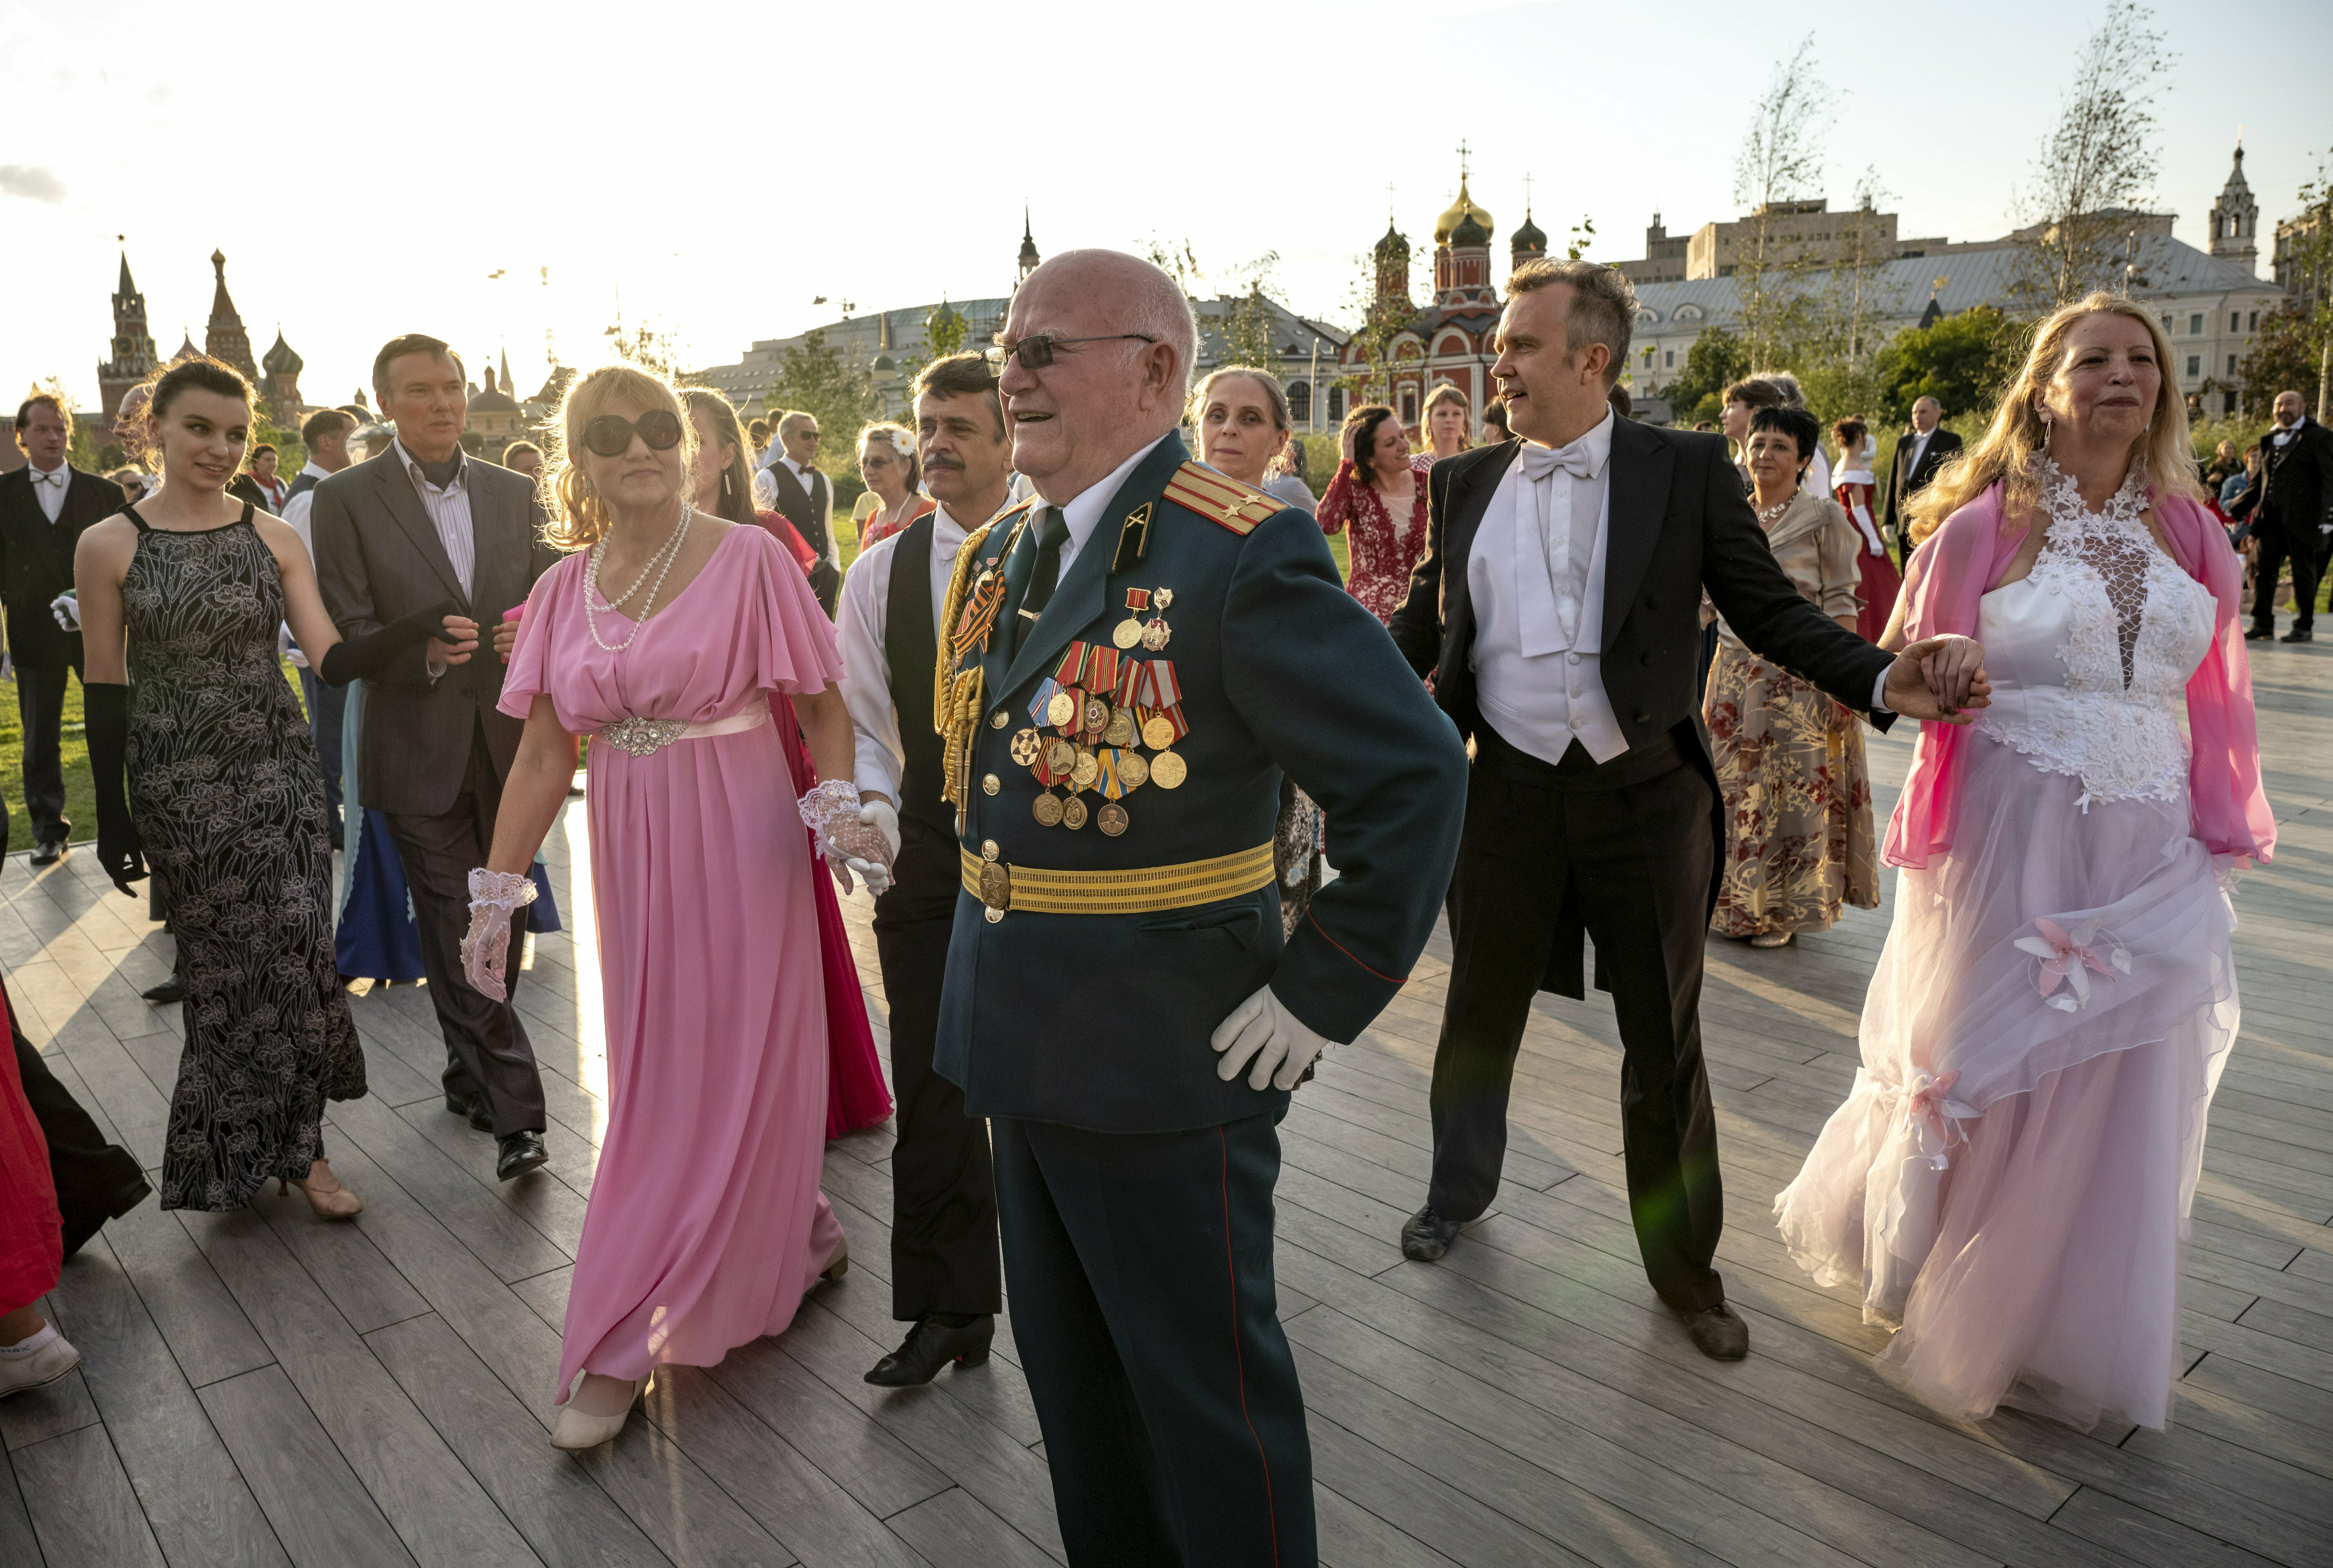 Couples prepare to dance at Zaryadye Park, with the Kremlin in the background, iin Moscow, Russia, Monday, July 8, 2019. Russia marks July 8 as the Day of Family, Love and Fidelity. (AP Photo/Alexander Zemlianichenko)